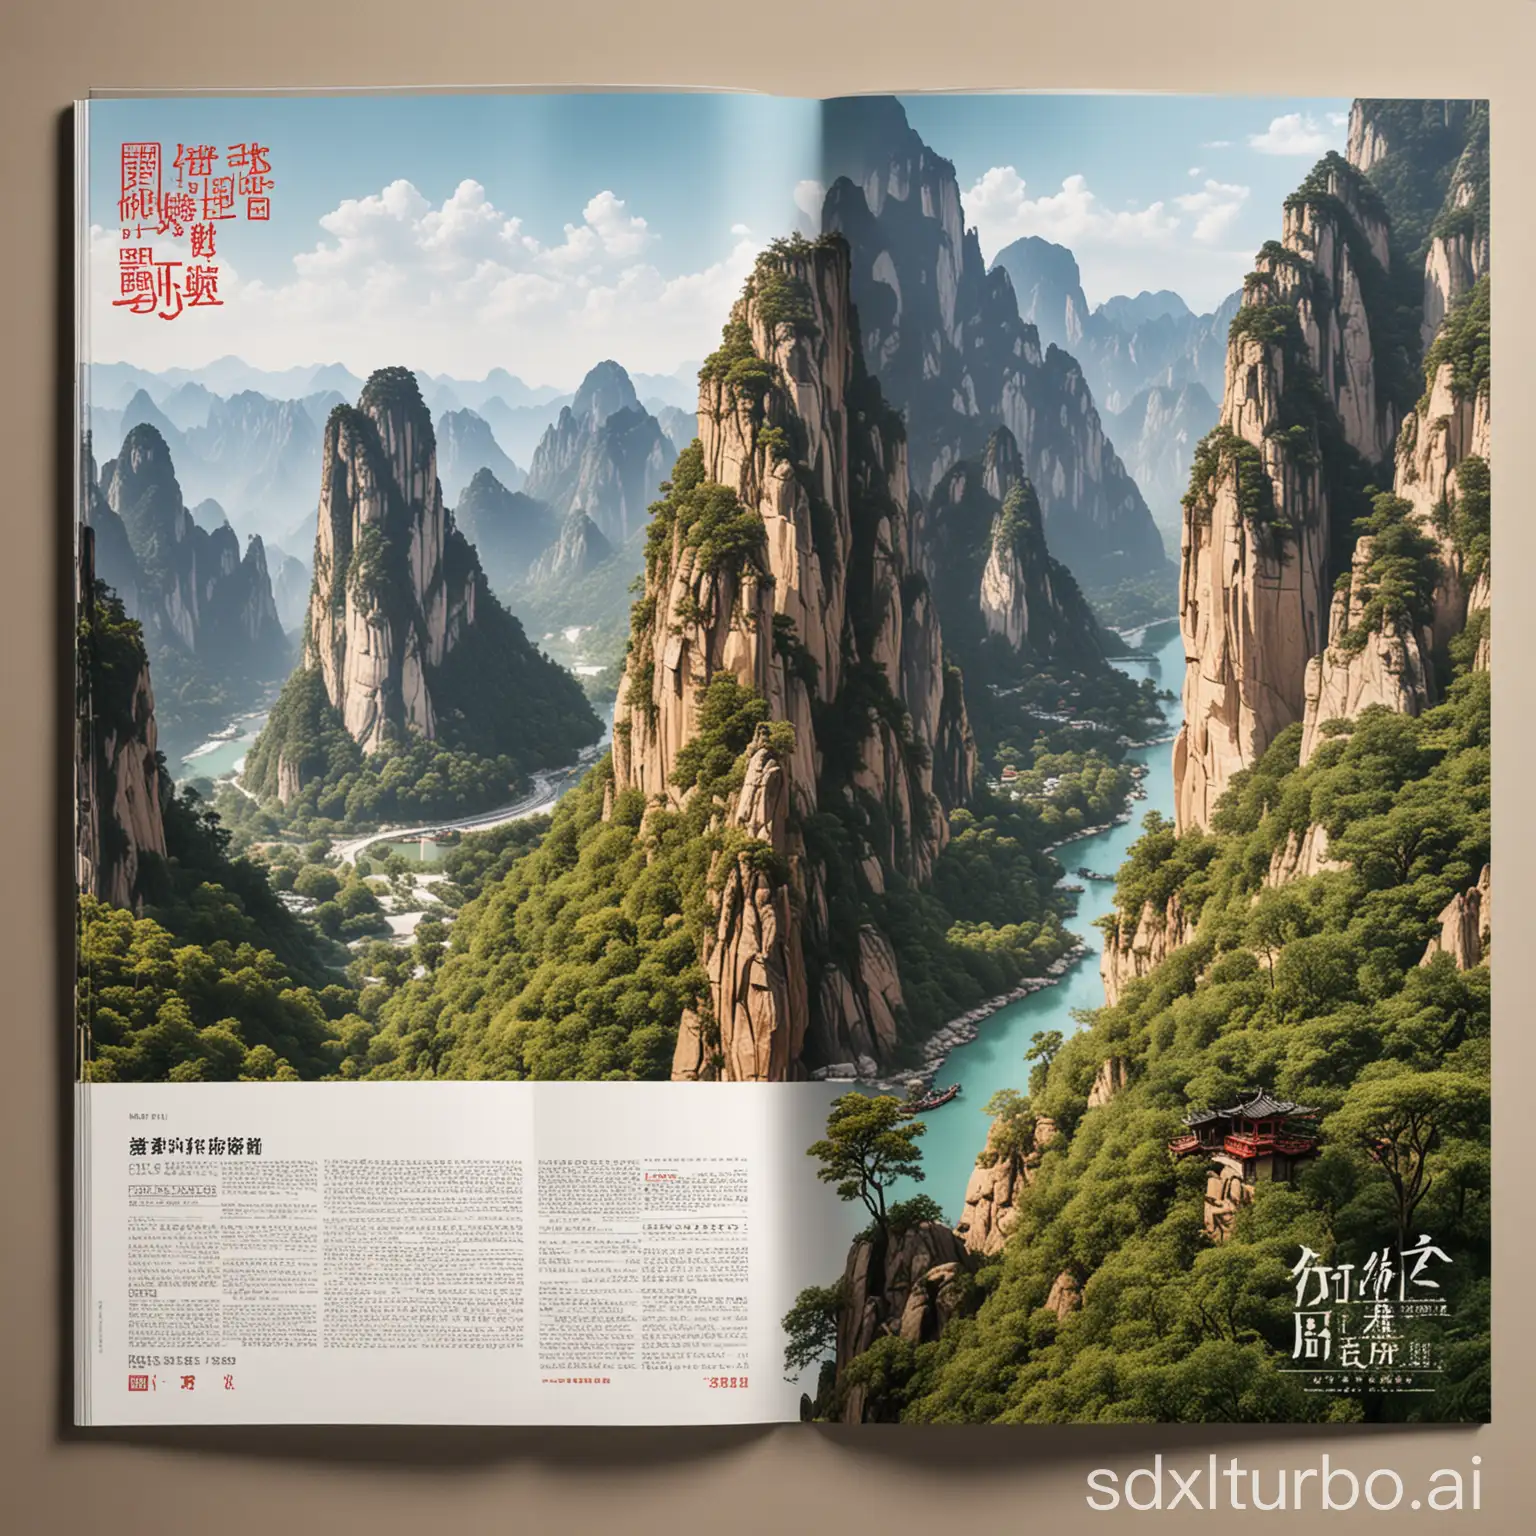 Create a magazine column cover; (1) the content features Huashan scenic spot, with characteristic of tourism attraction for the magazine cover work. (2) Design and create using Adobe Illustrator 2020 software, size 420mm (wide) * 285mm (high), resolution 300dpi, color mode CMYK. (3) Includes Adobe Illustrator 2020 source file (.ai).